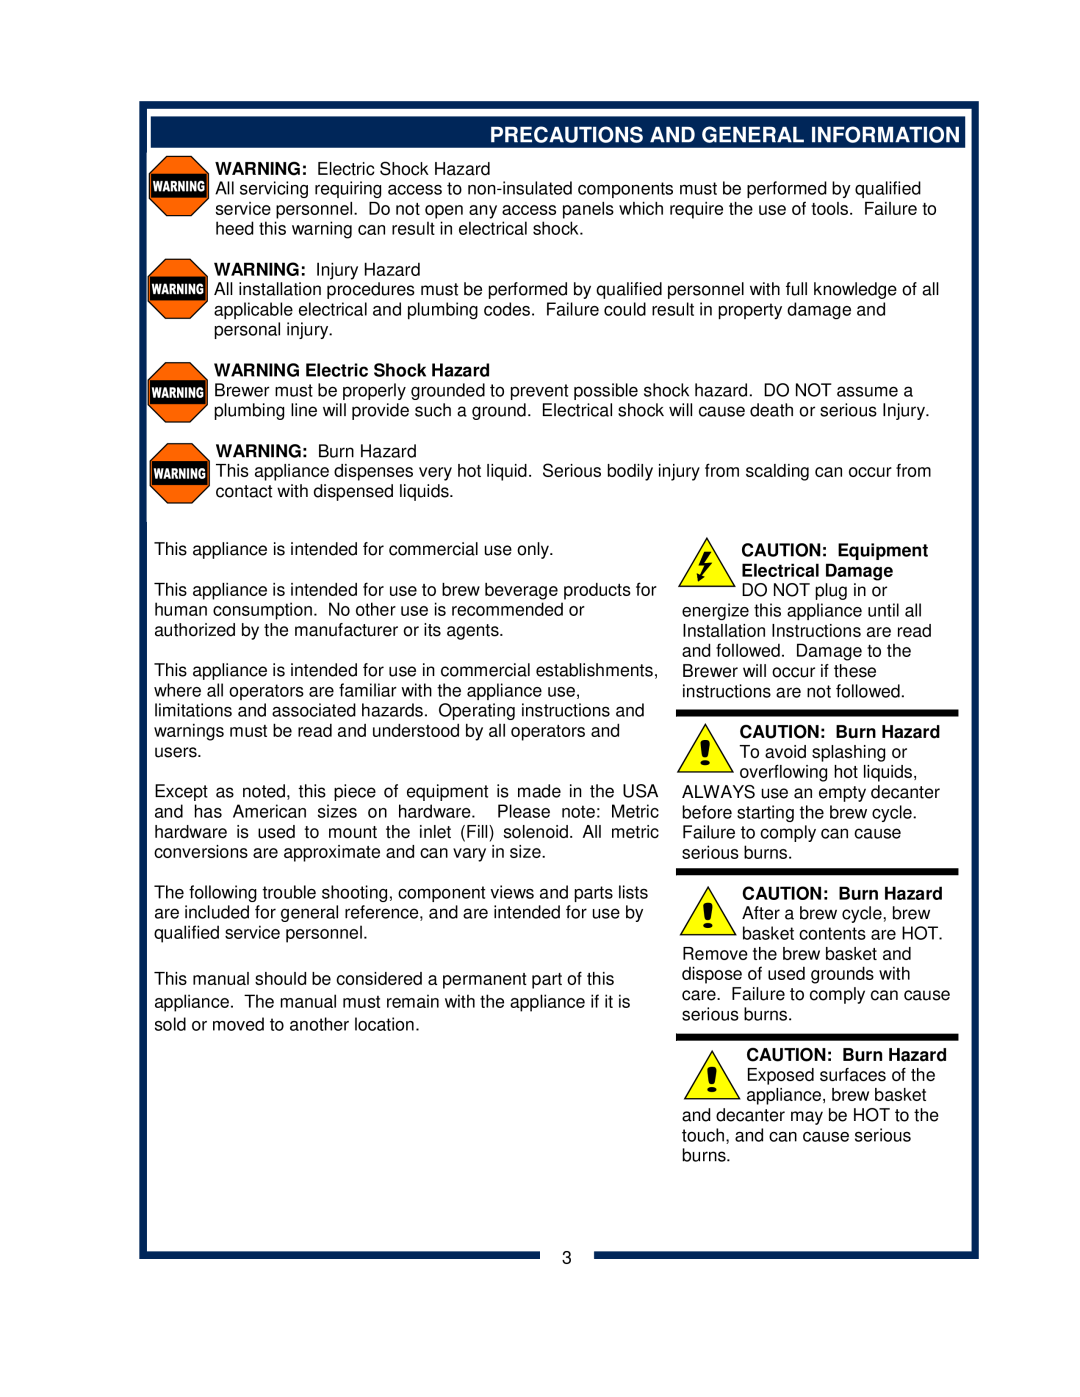 Bloomfield 2072 Precautions And General Information, WARNING Electric Shock Hazard, CAUTION Equipment Electrical Damage 